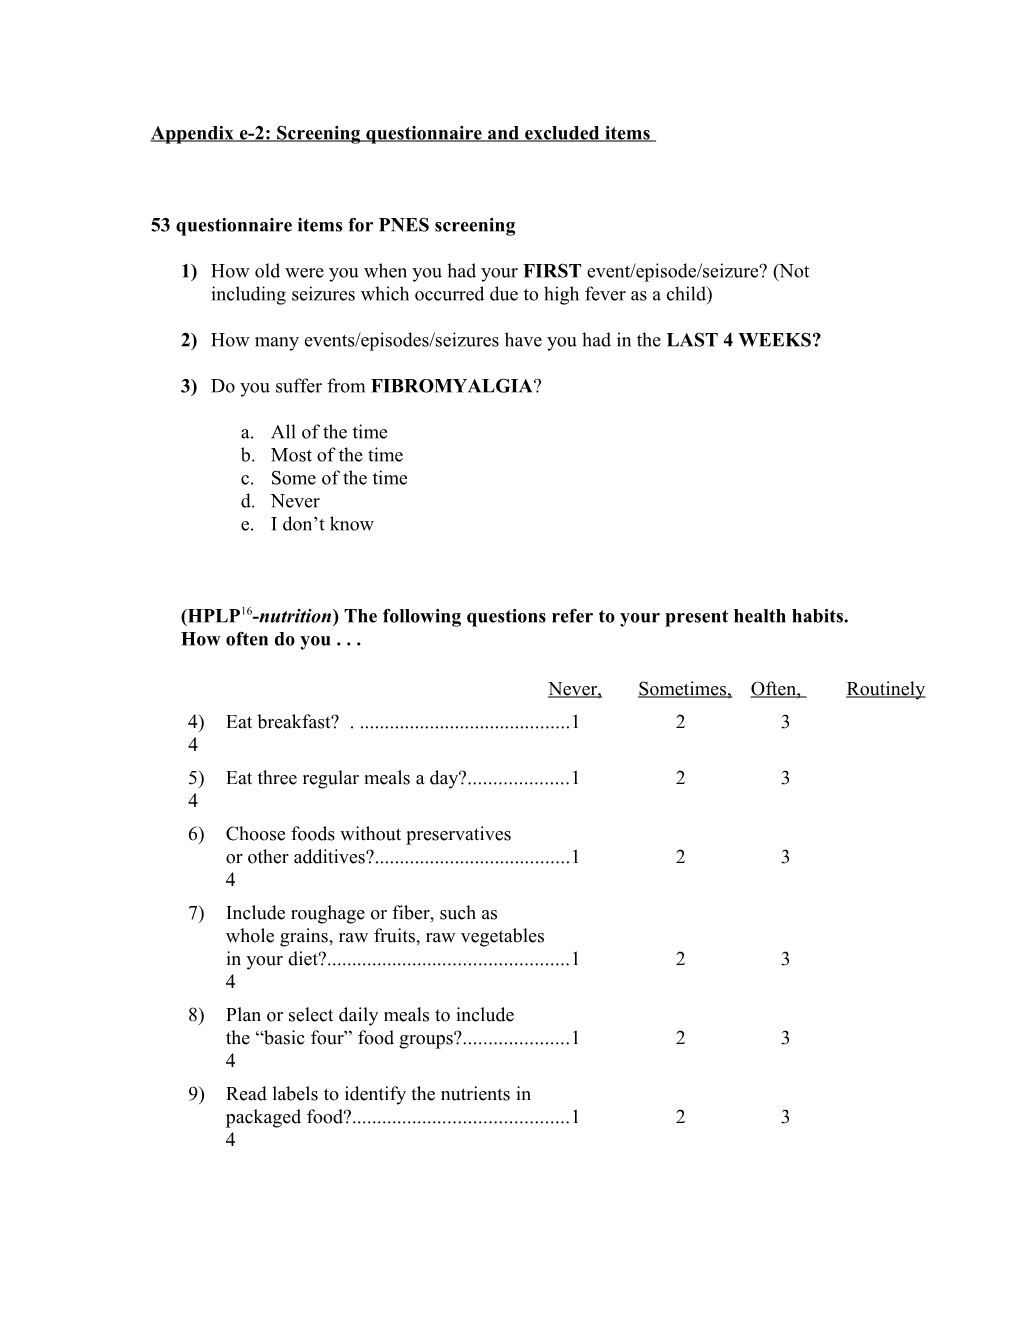 Appendix E-2: Screening Questionnaire and Excluded Items